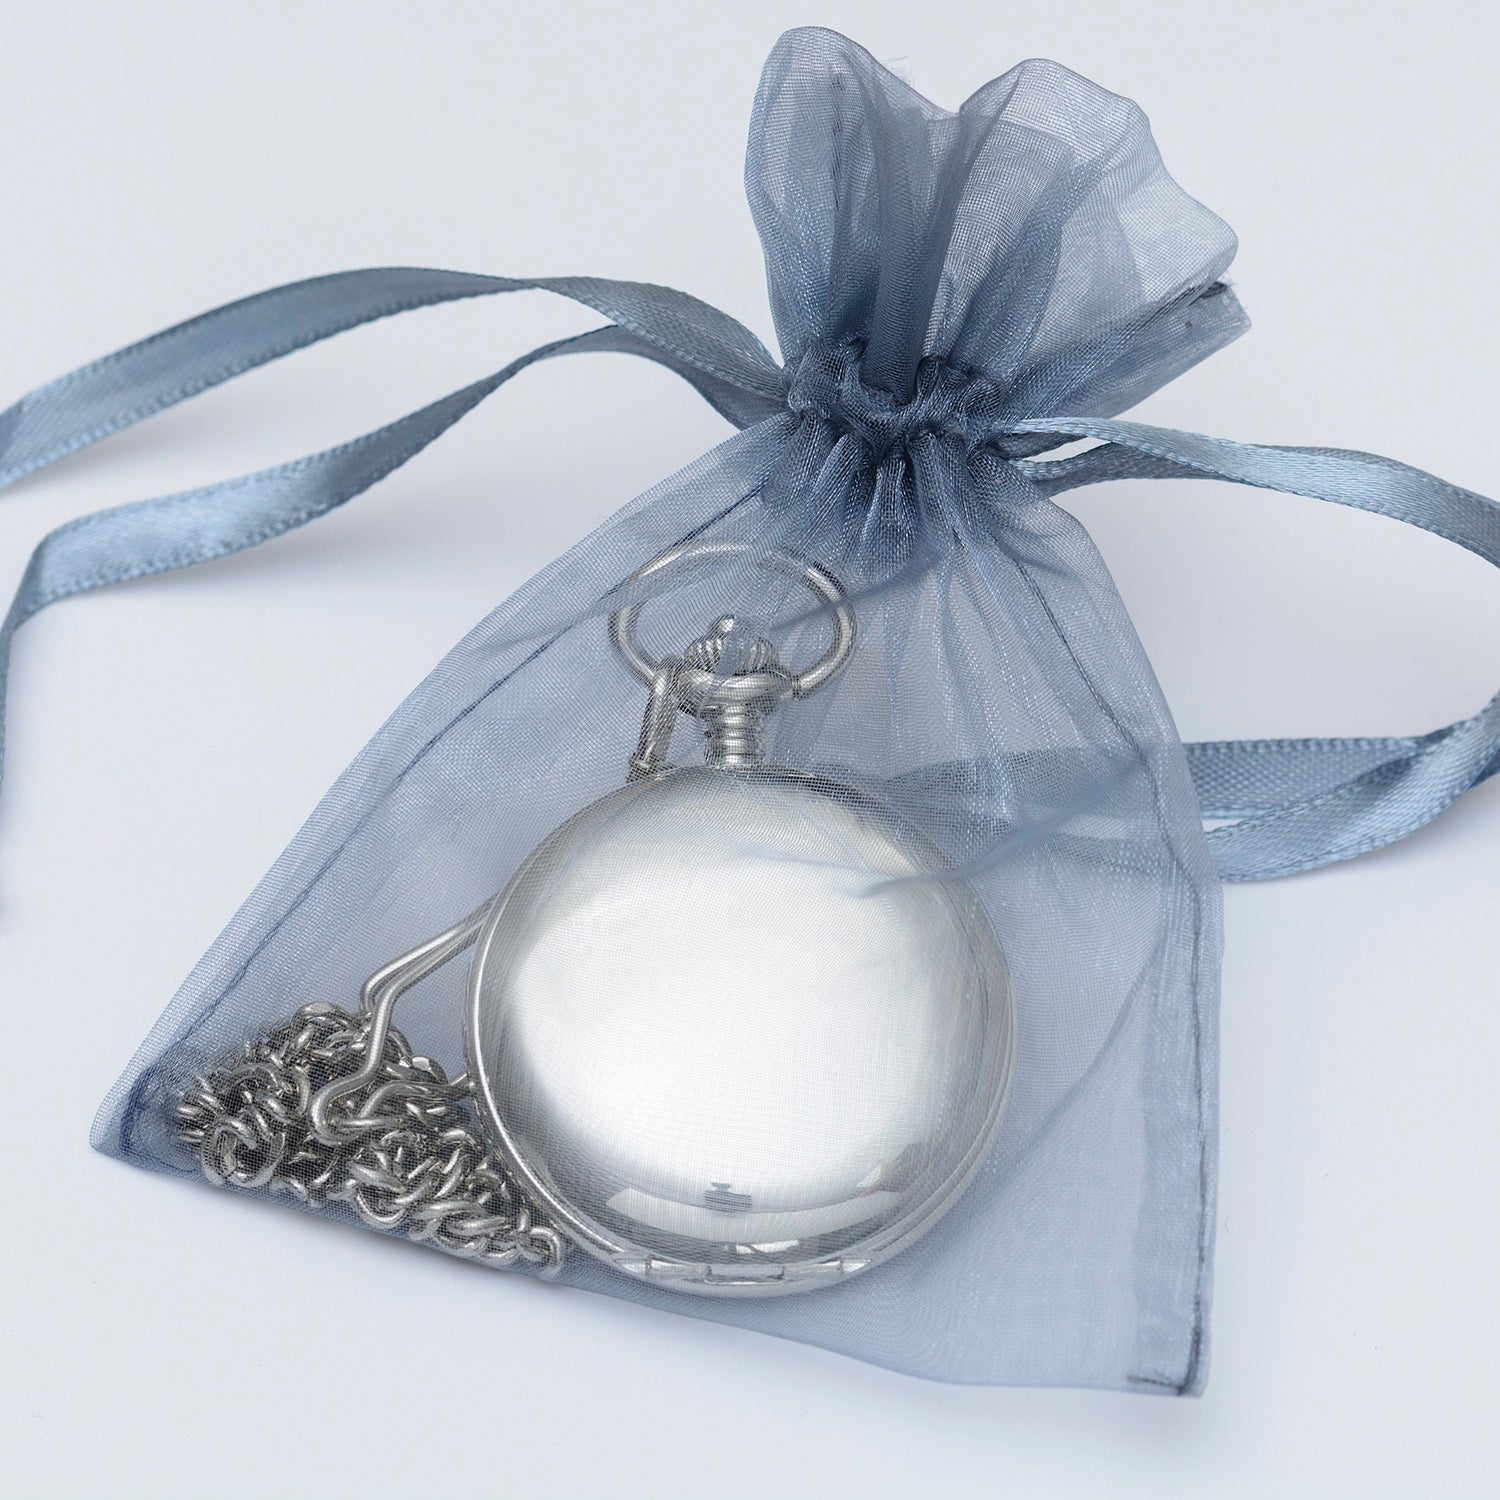 Engraved Pocket Watch For Father Of The Groom - Thank You